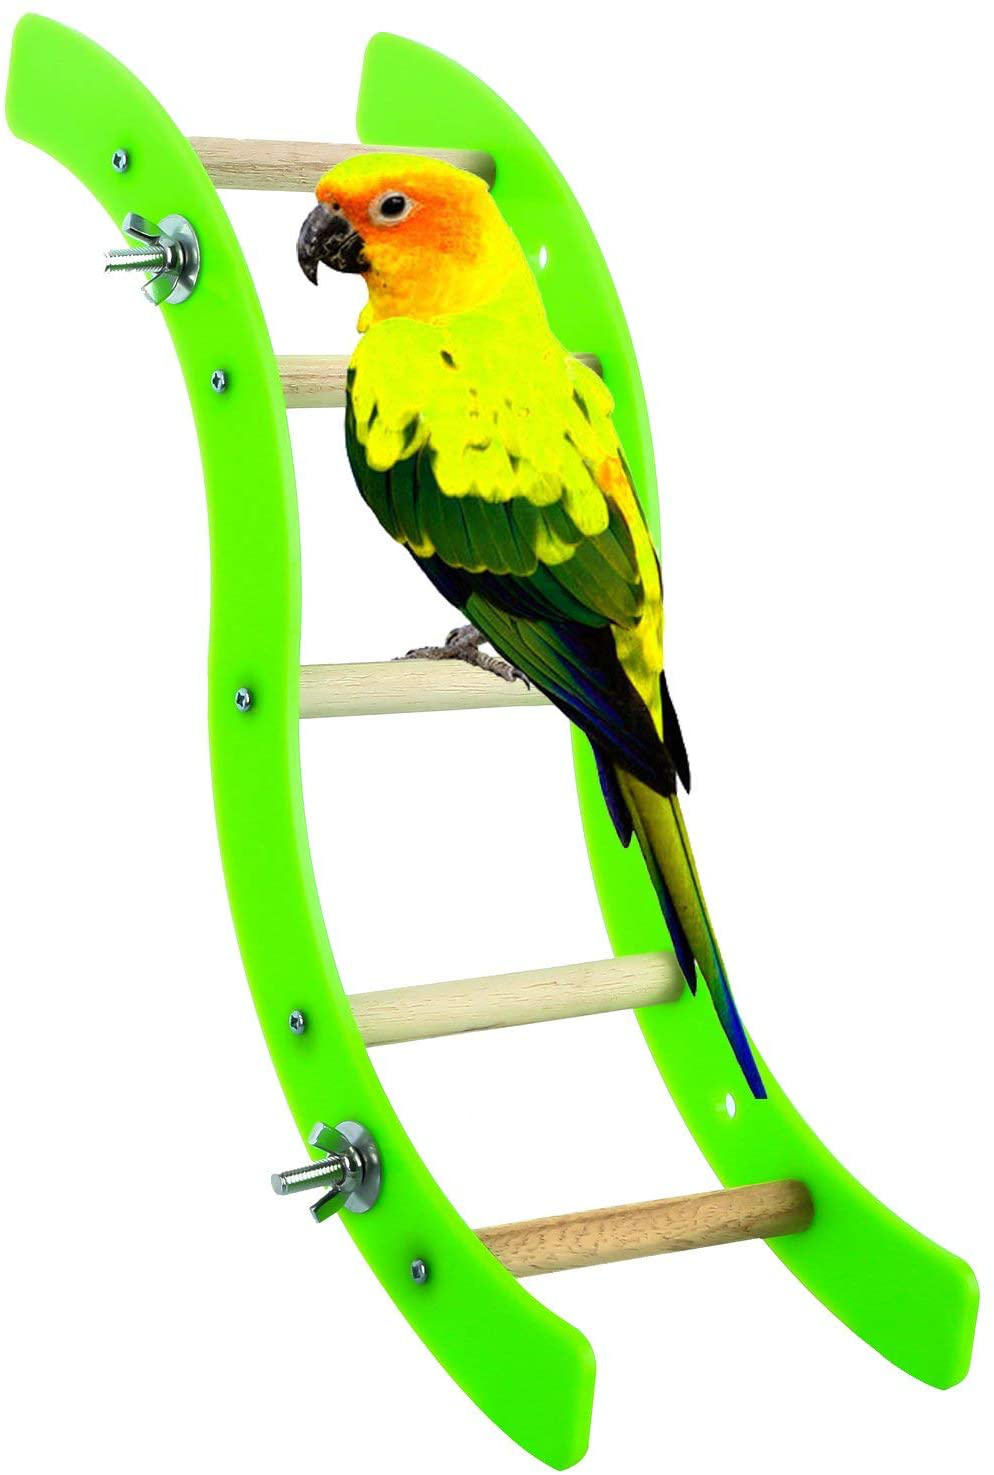 Litewood Pet Bird Hamster Acrylic Wave Ladder Stand Crawling Ladders Parrot Perch Toy for Small and Medium Animals Rabbit Chinchilla Macaw African Greys Cage Climbing Game Play Toys